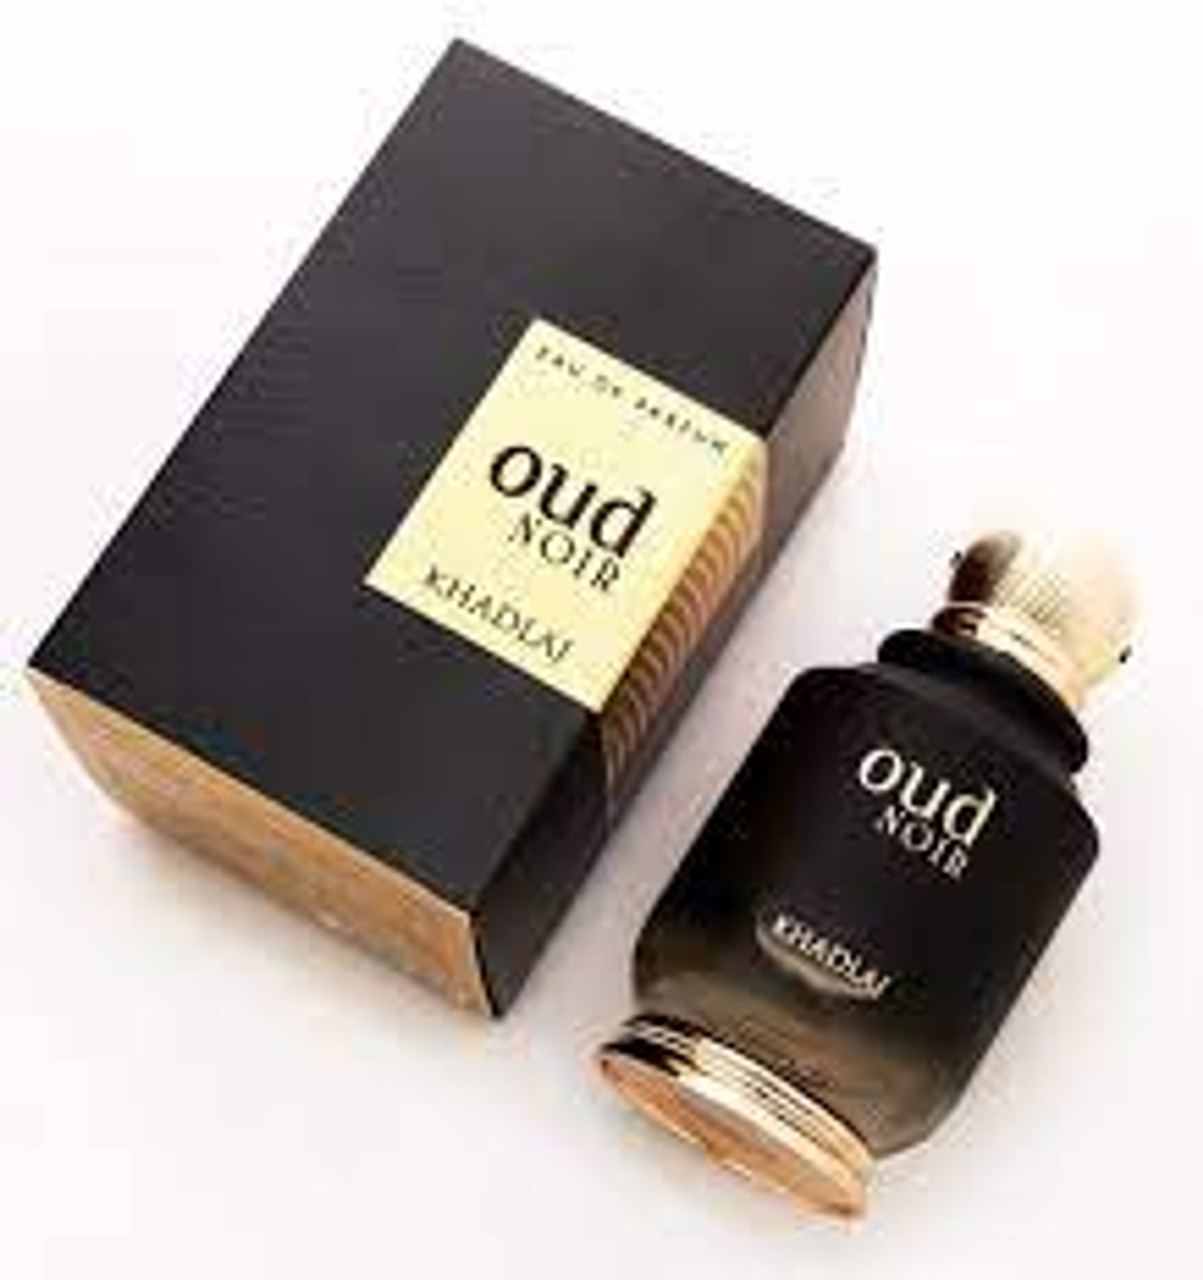 Oil Perfumery Impression of Louis Vuitton - Ombre Nomade